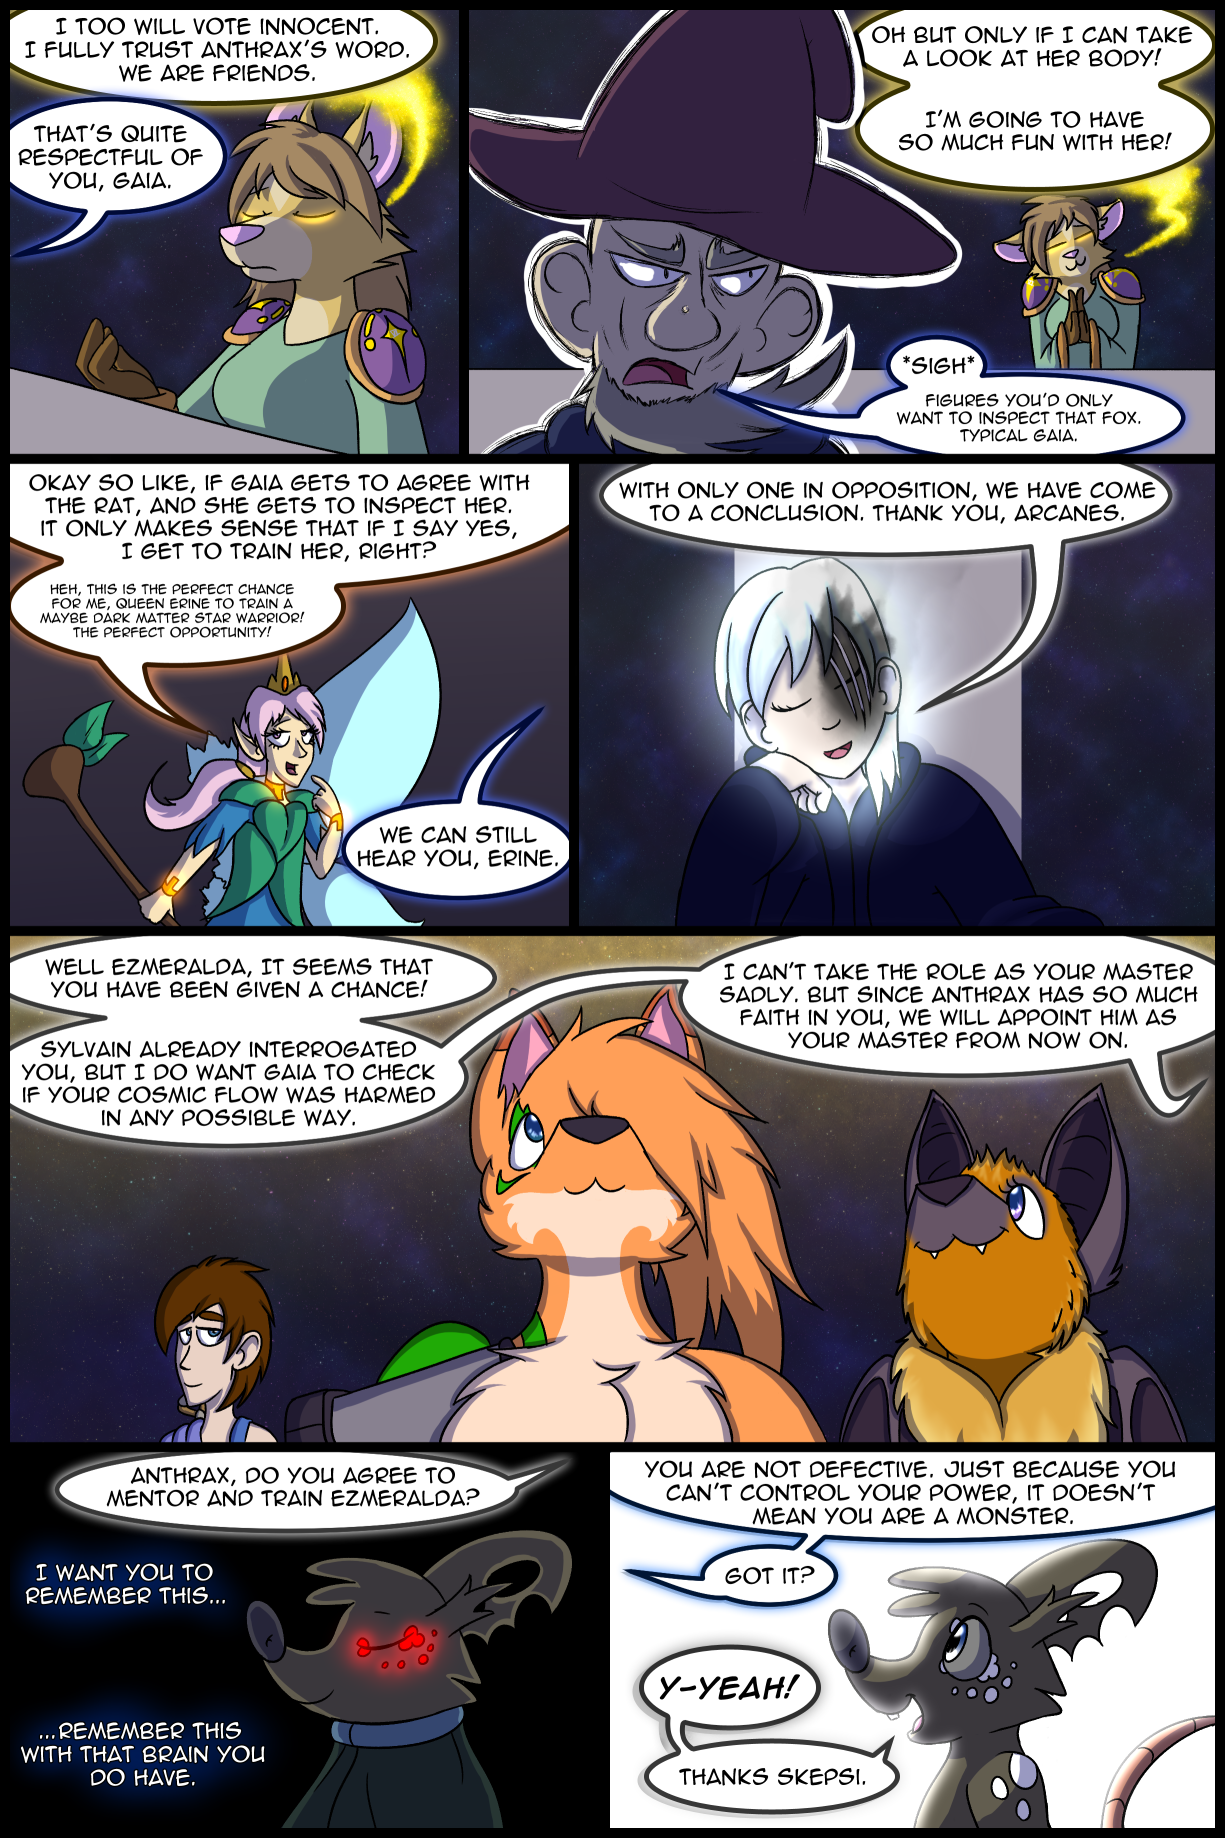 Ch4 Page 14 – Remember This